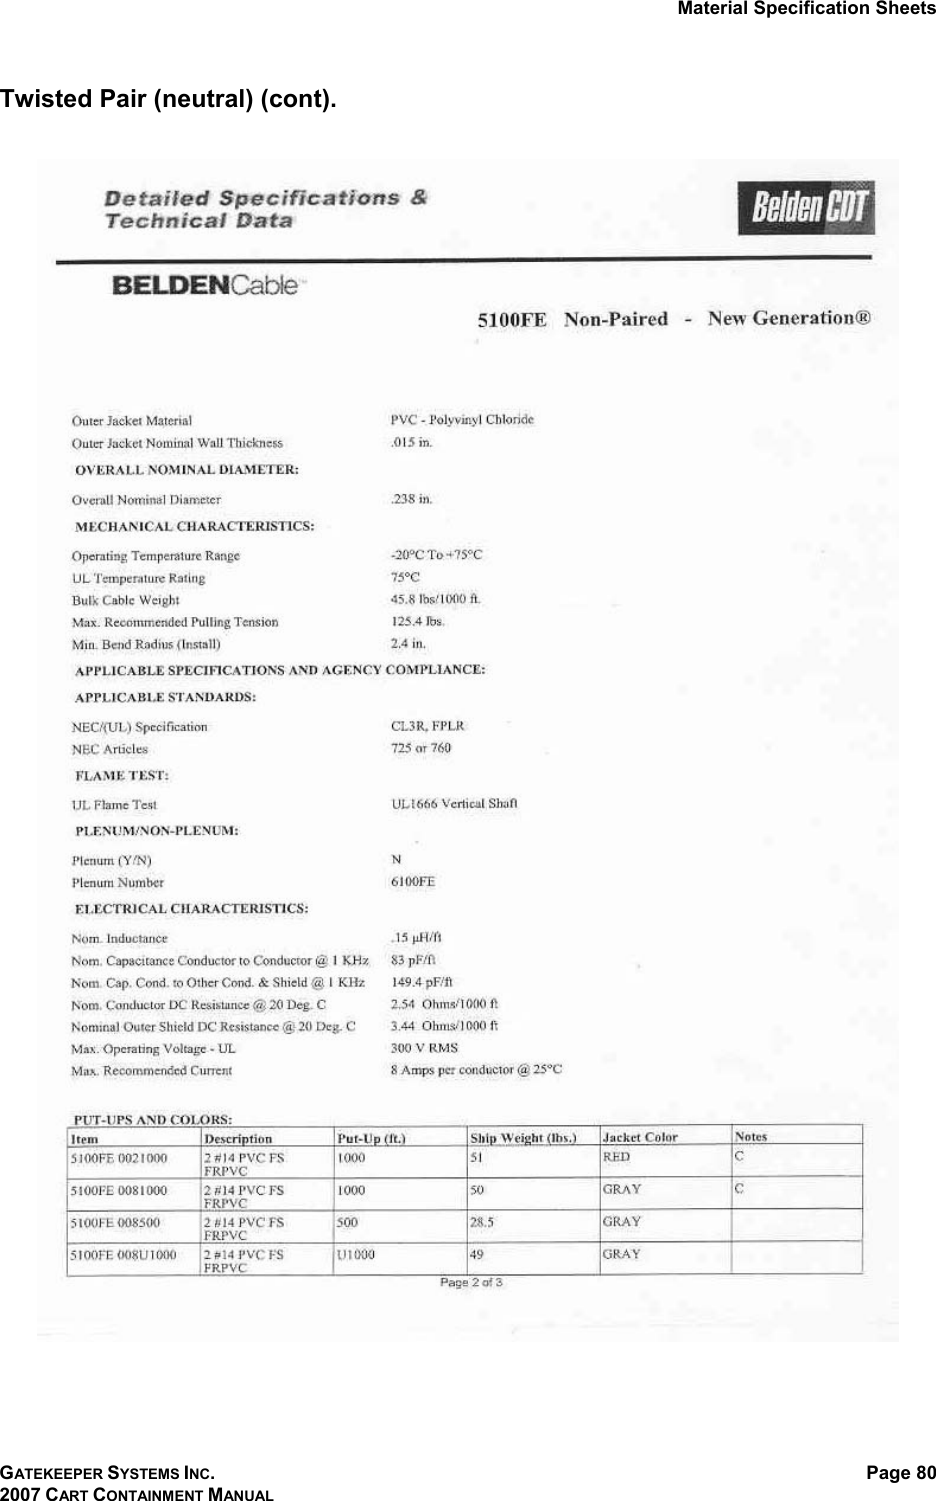 Material Specification Sheets GATEKEEPER SYSTEMS INC. 2007 CART CONTAINMENT MANUAL Page 80  Twisted Pair (neutral) (cont).   